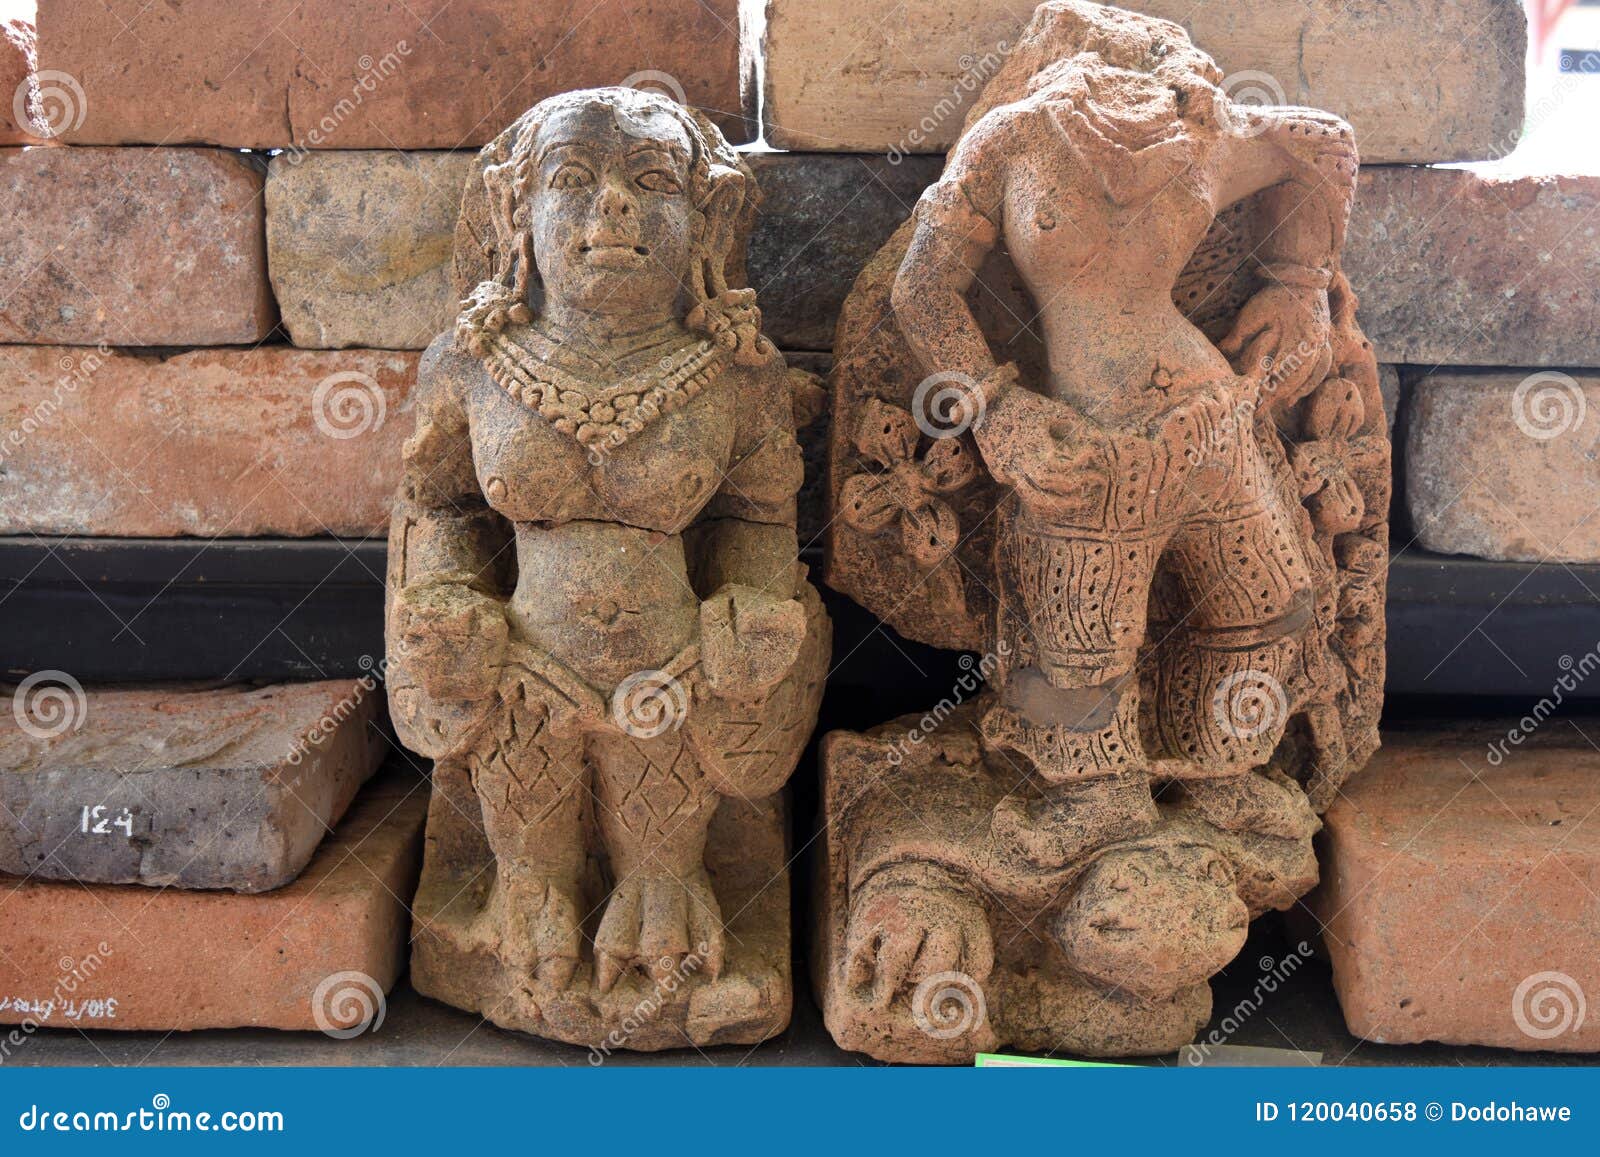 Two stone statues believed to be heirlooms from the Majapahit Kingdom, displayed in front of a brick wall.